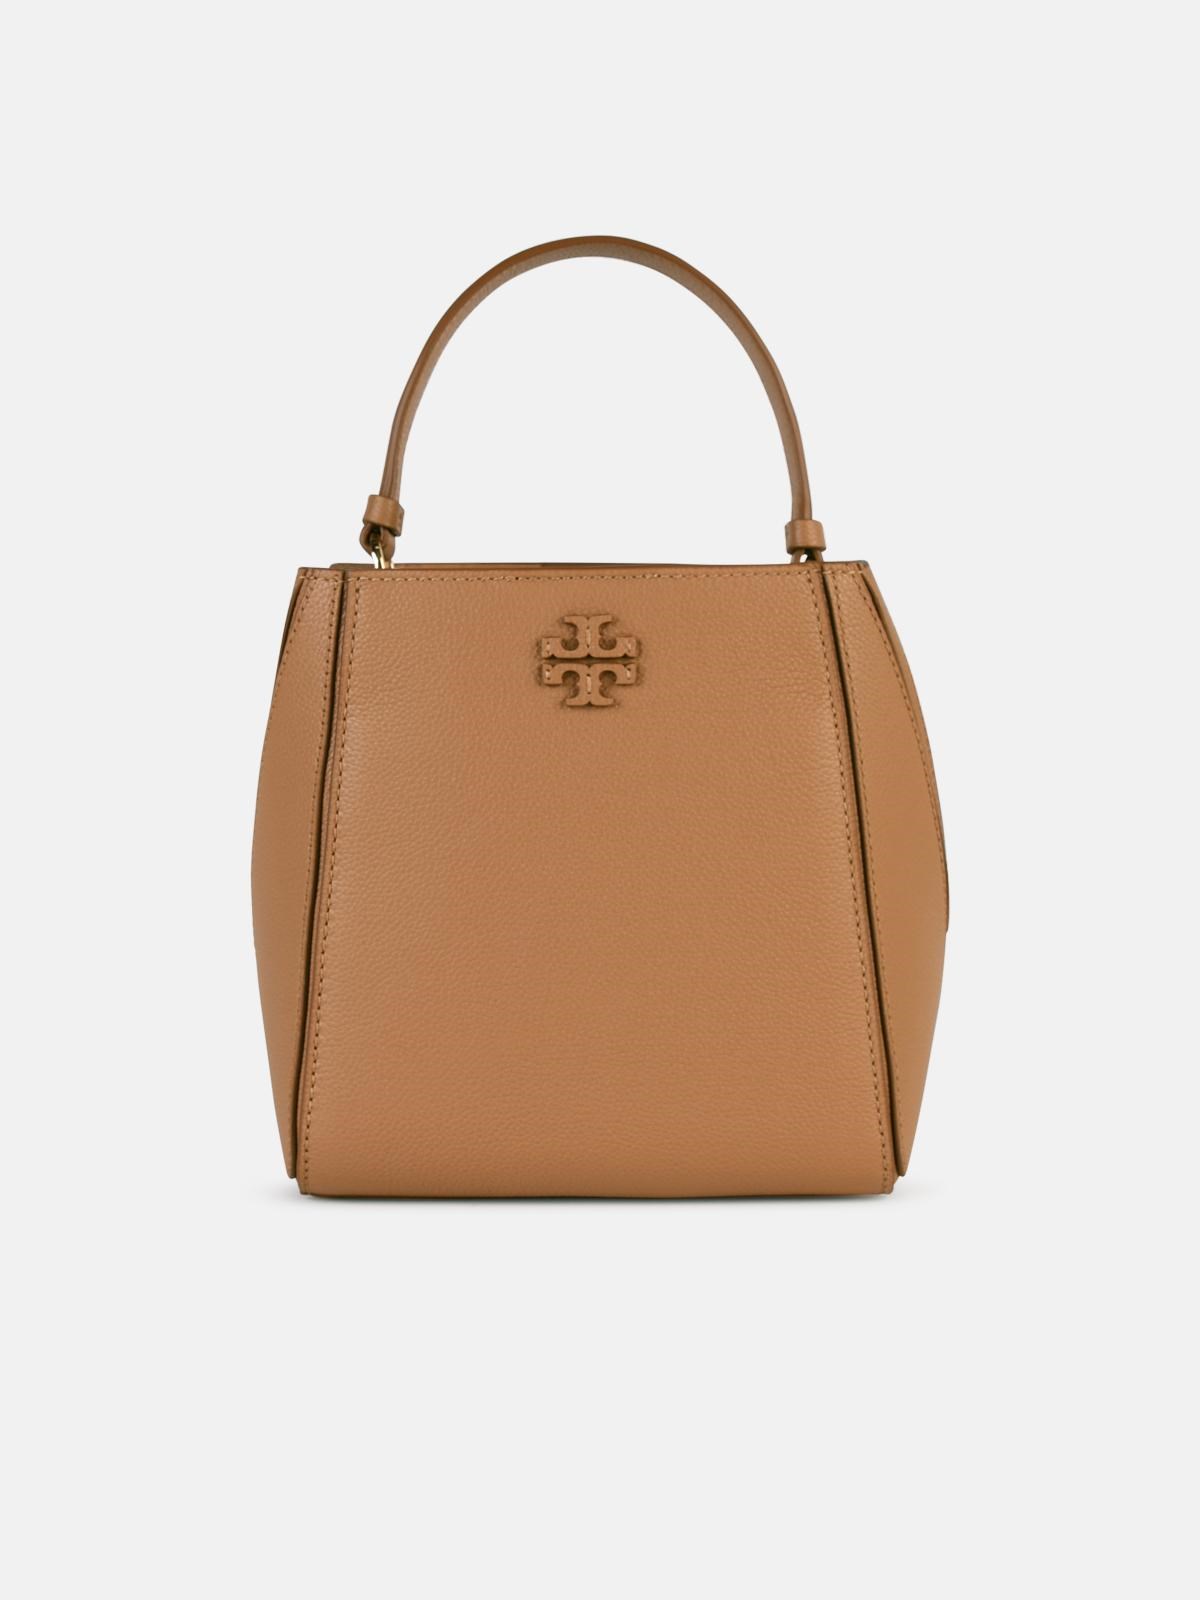 Tory Burch 'mcgraw' Bucket Bag In Beige Leather In Brown